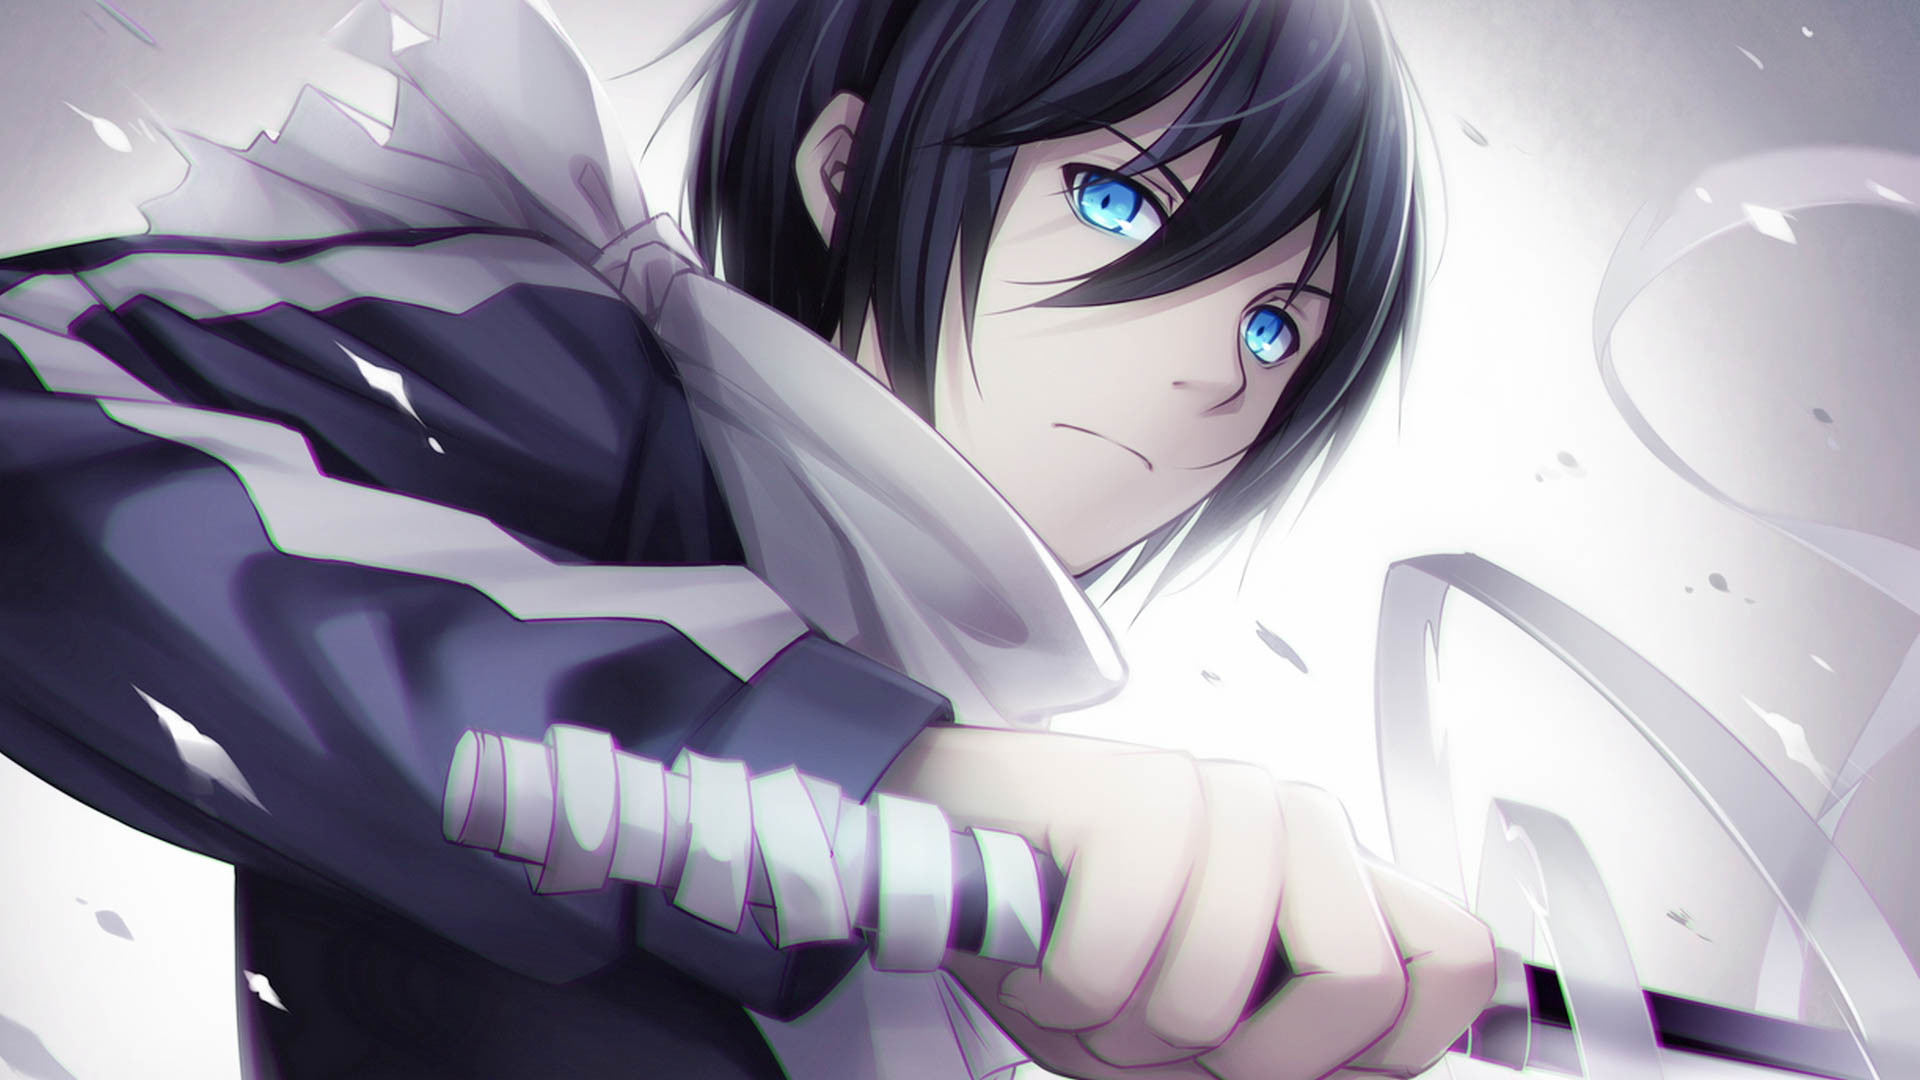 1920x1080 Anime Noragami Amazing Wallpapers And Images In High Quality ...